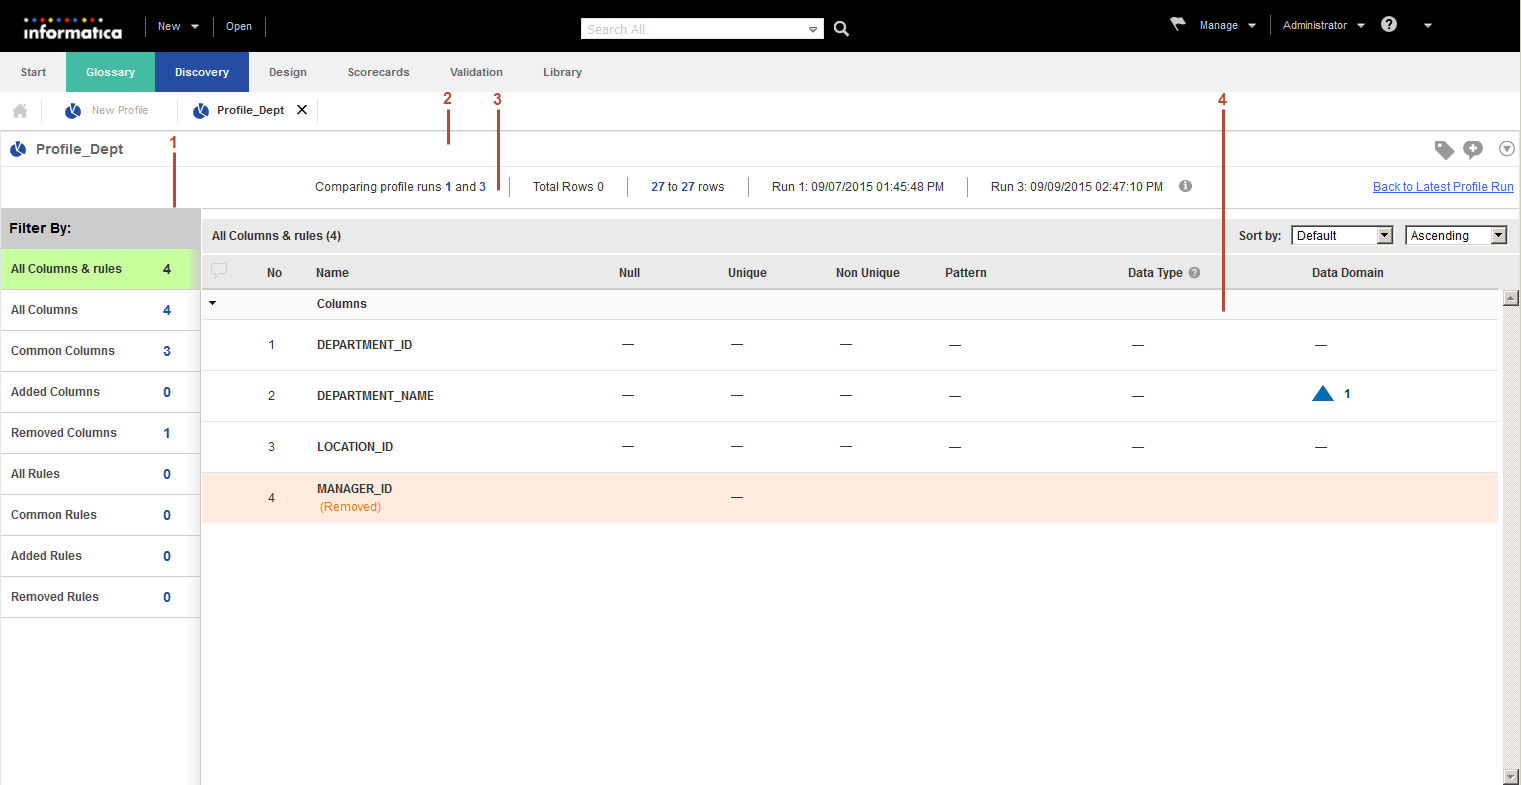 The image shows the compare profile results in summary view for two profile runs.
		  